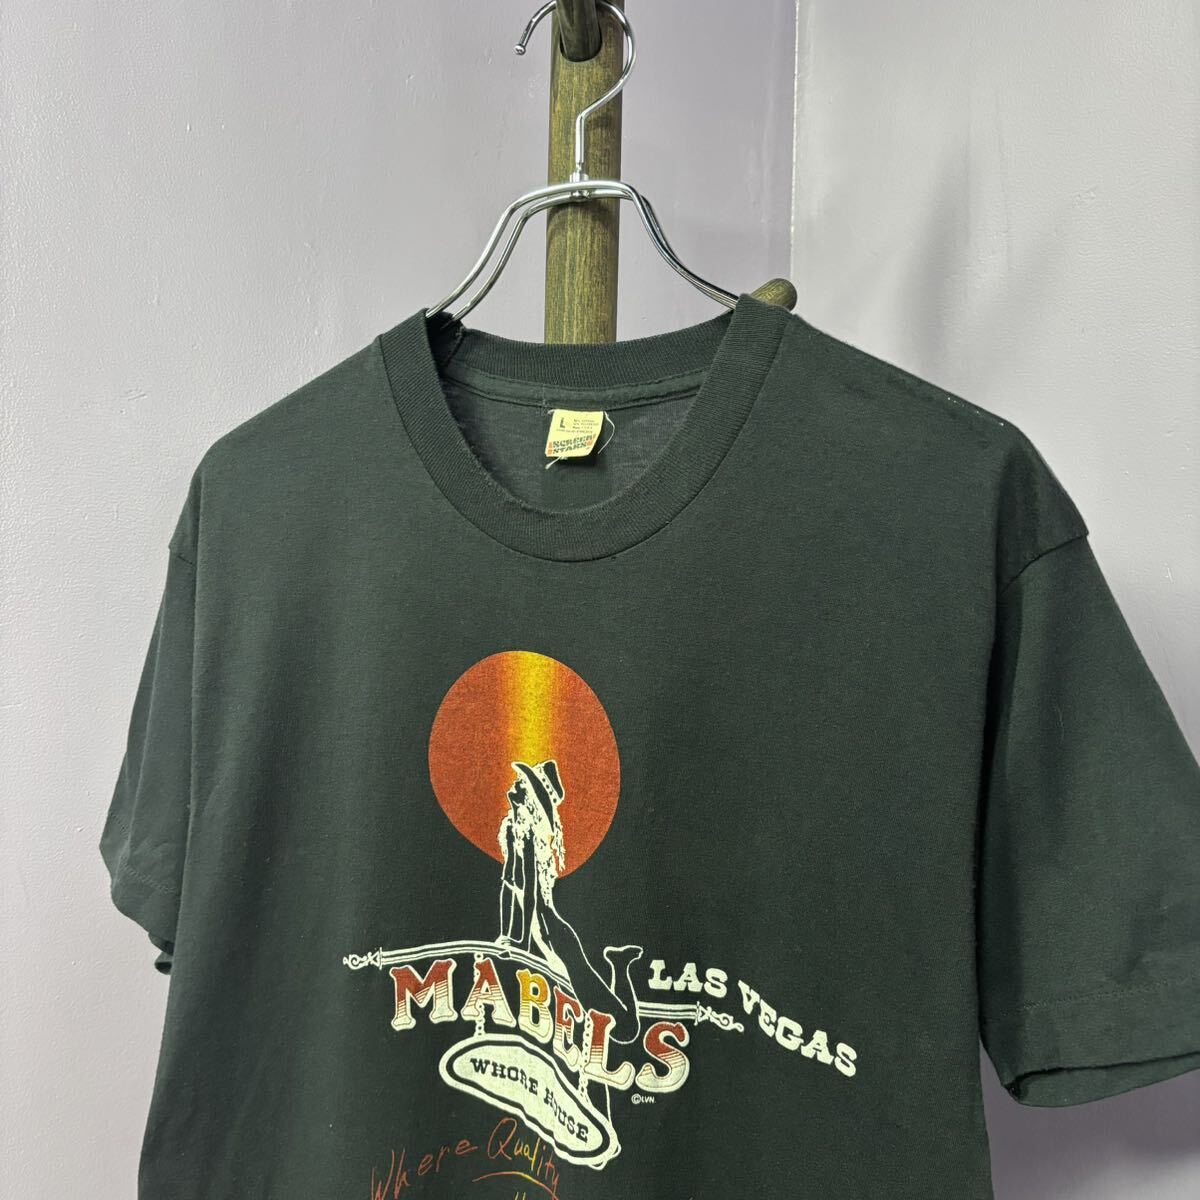 90s USA製　MABELS WHORE HOUSE LOS VEGAS グラフィック　Tシャツ　 アメカジ　古着　アメリカ古着　都内　中野区　古着屋_画像6